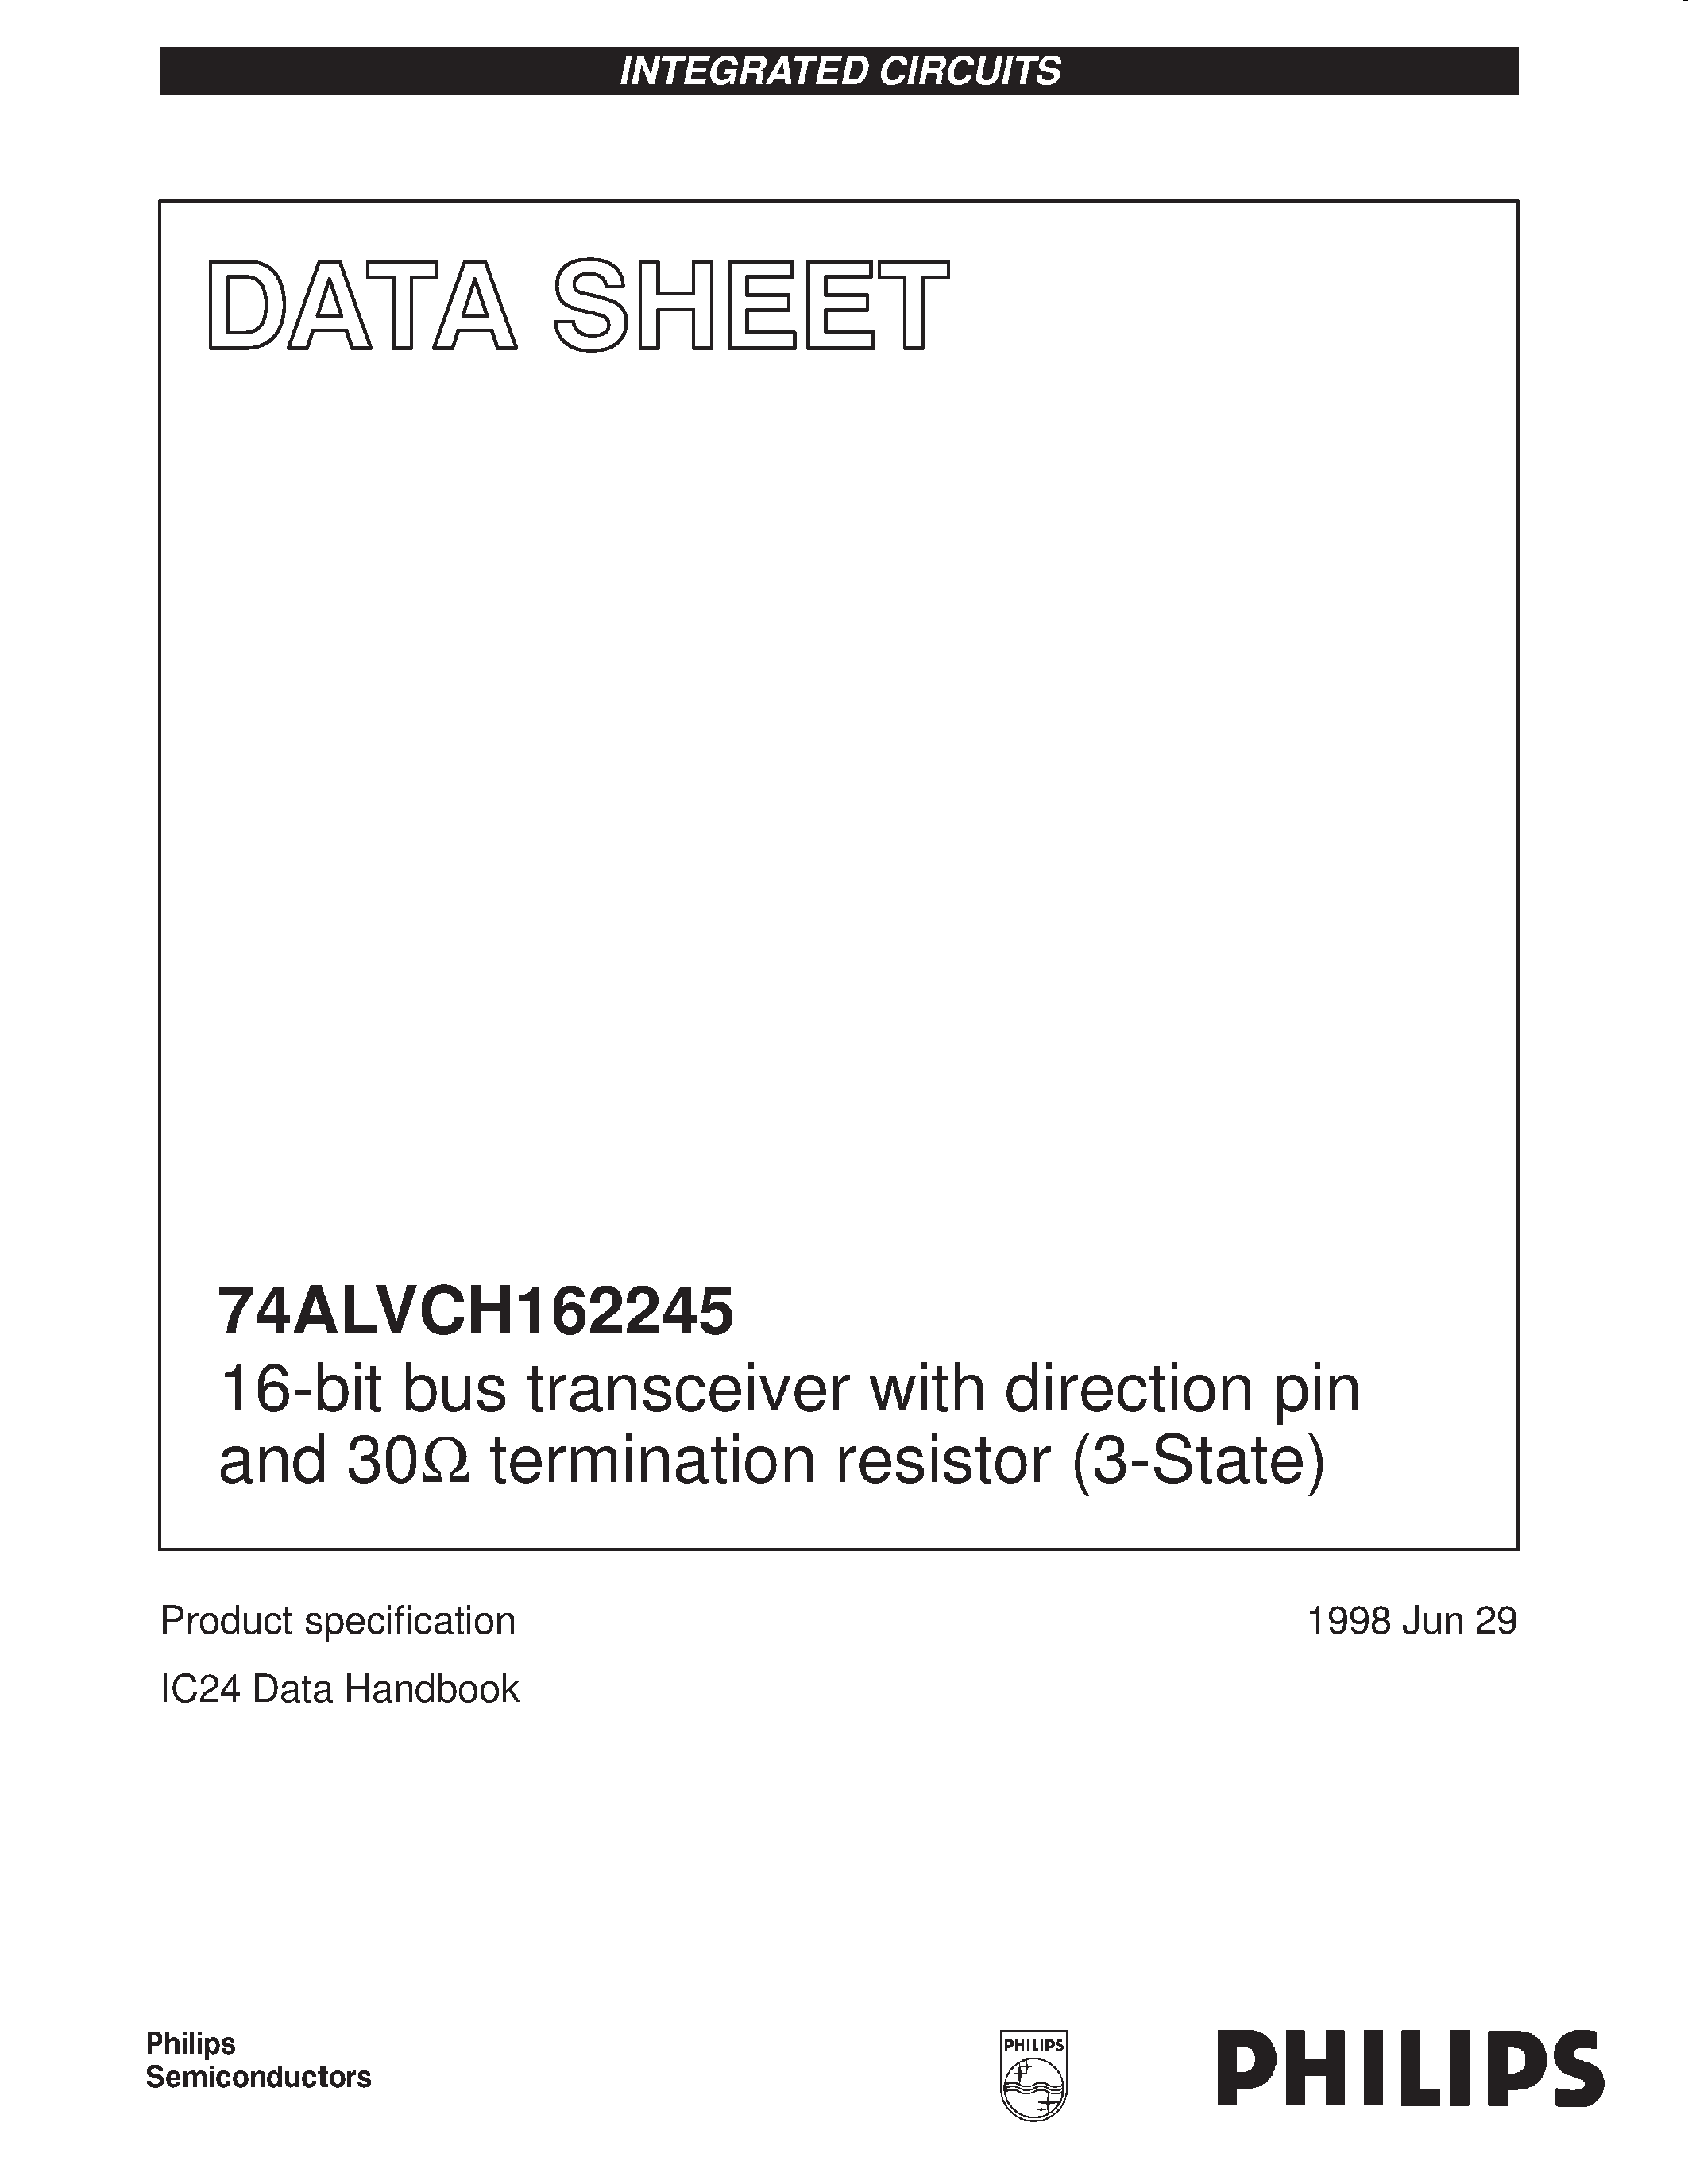 Даташит 74ALVCH162245-16-bit bus transceiver with direction pin and 30ohm termination resistor 3-State страница 1